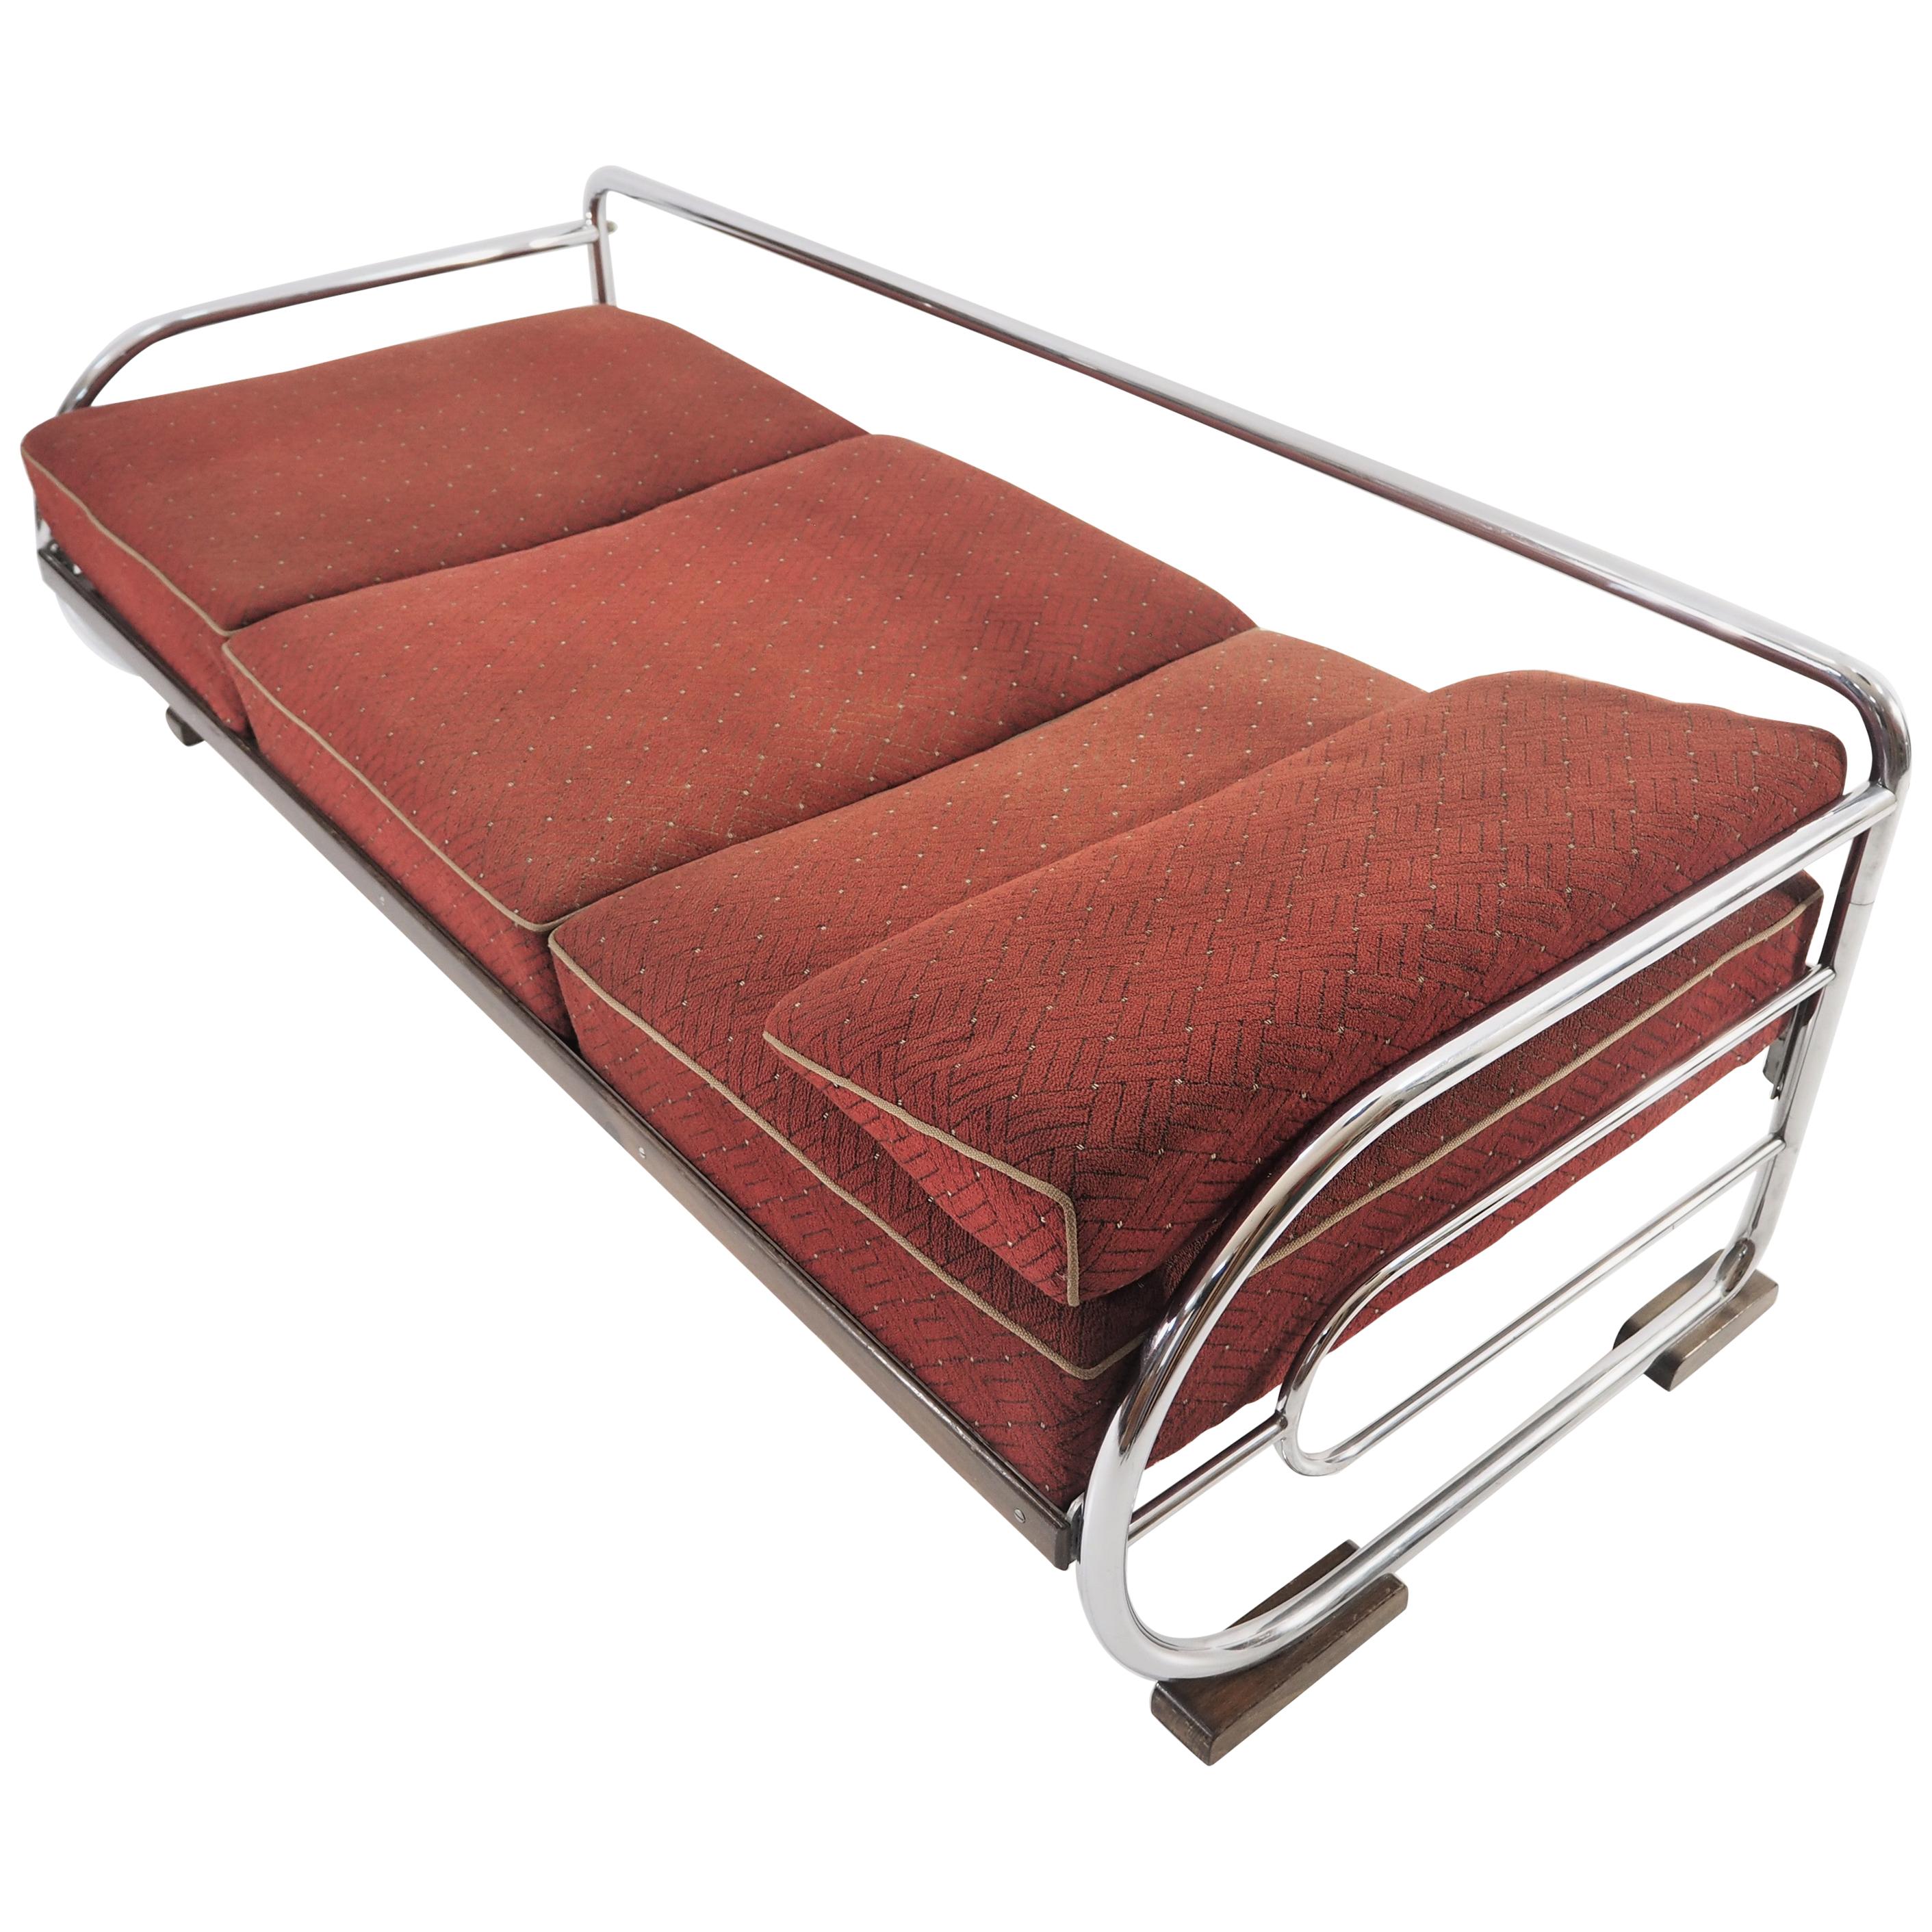 Art Deco Daybed from Hynek Gottwald, circa 1930s